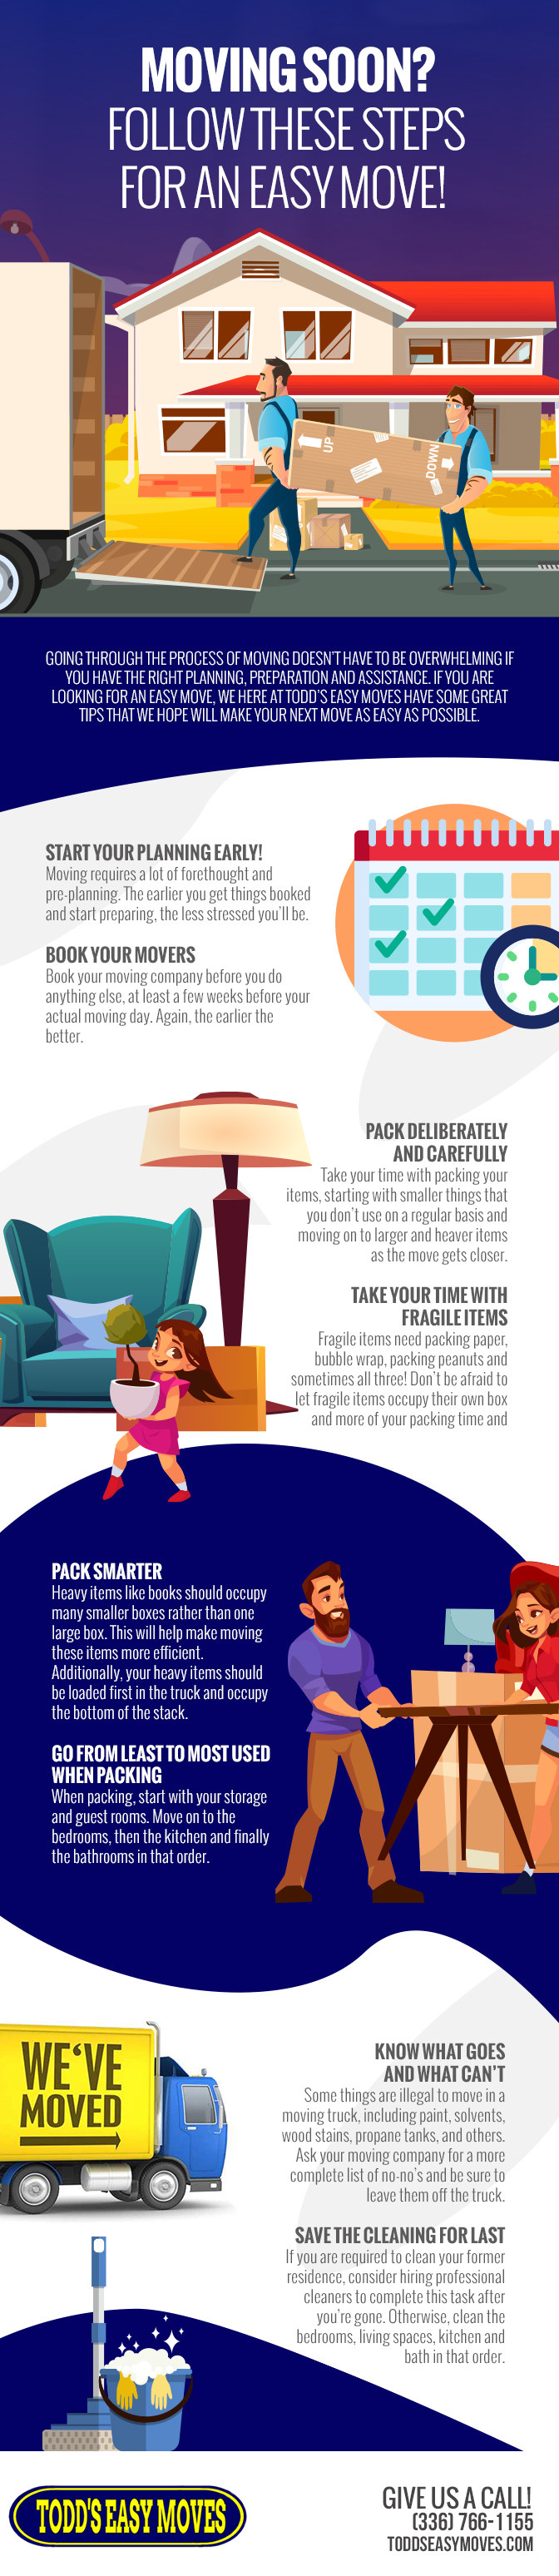 Moving Soon? Follow These Steps for an Easy Move! [infographic]